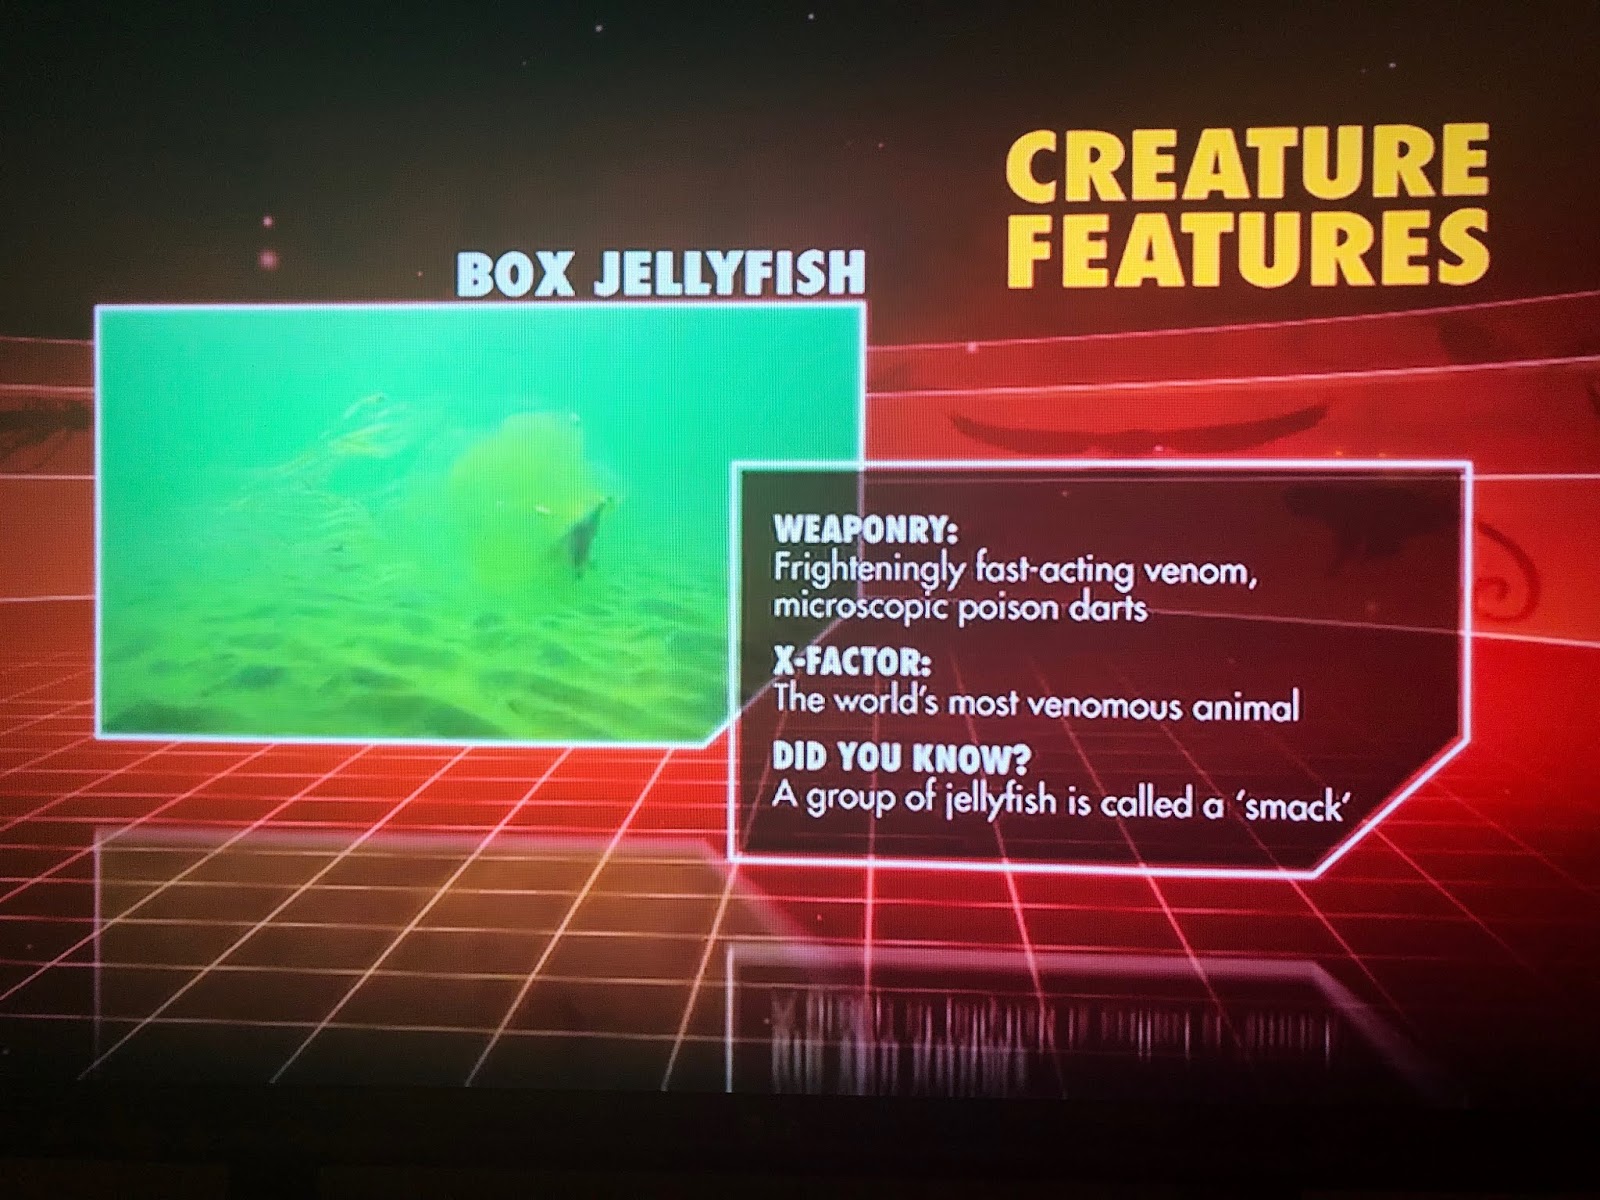 Can Box Jellyfish Top This Netflix List?